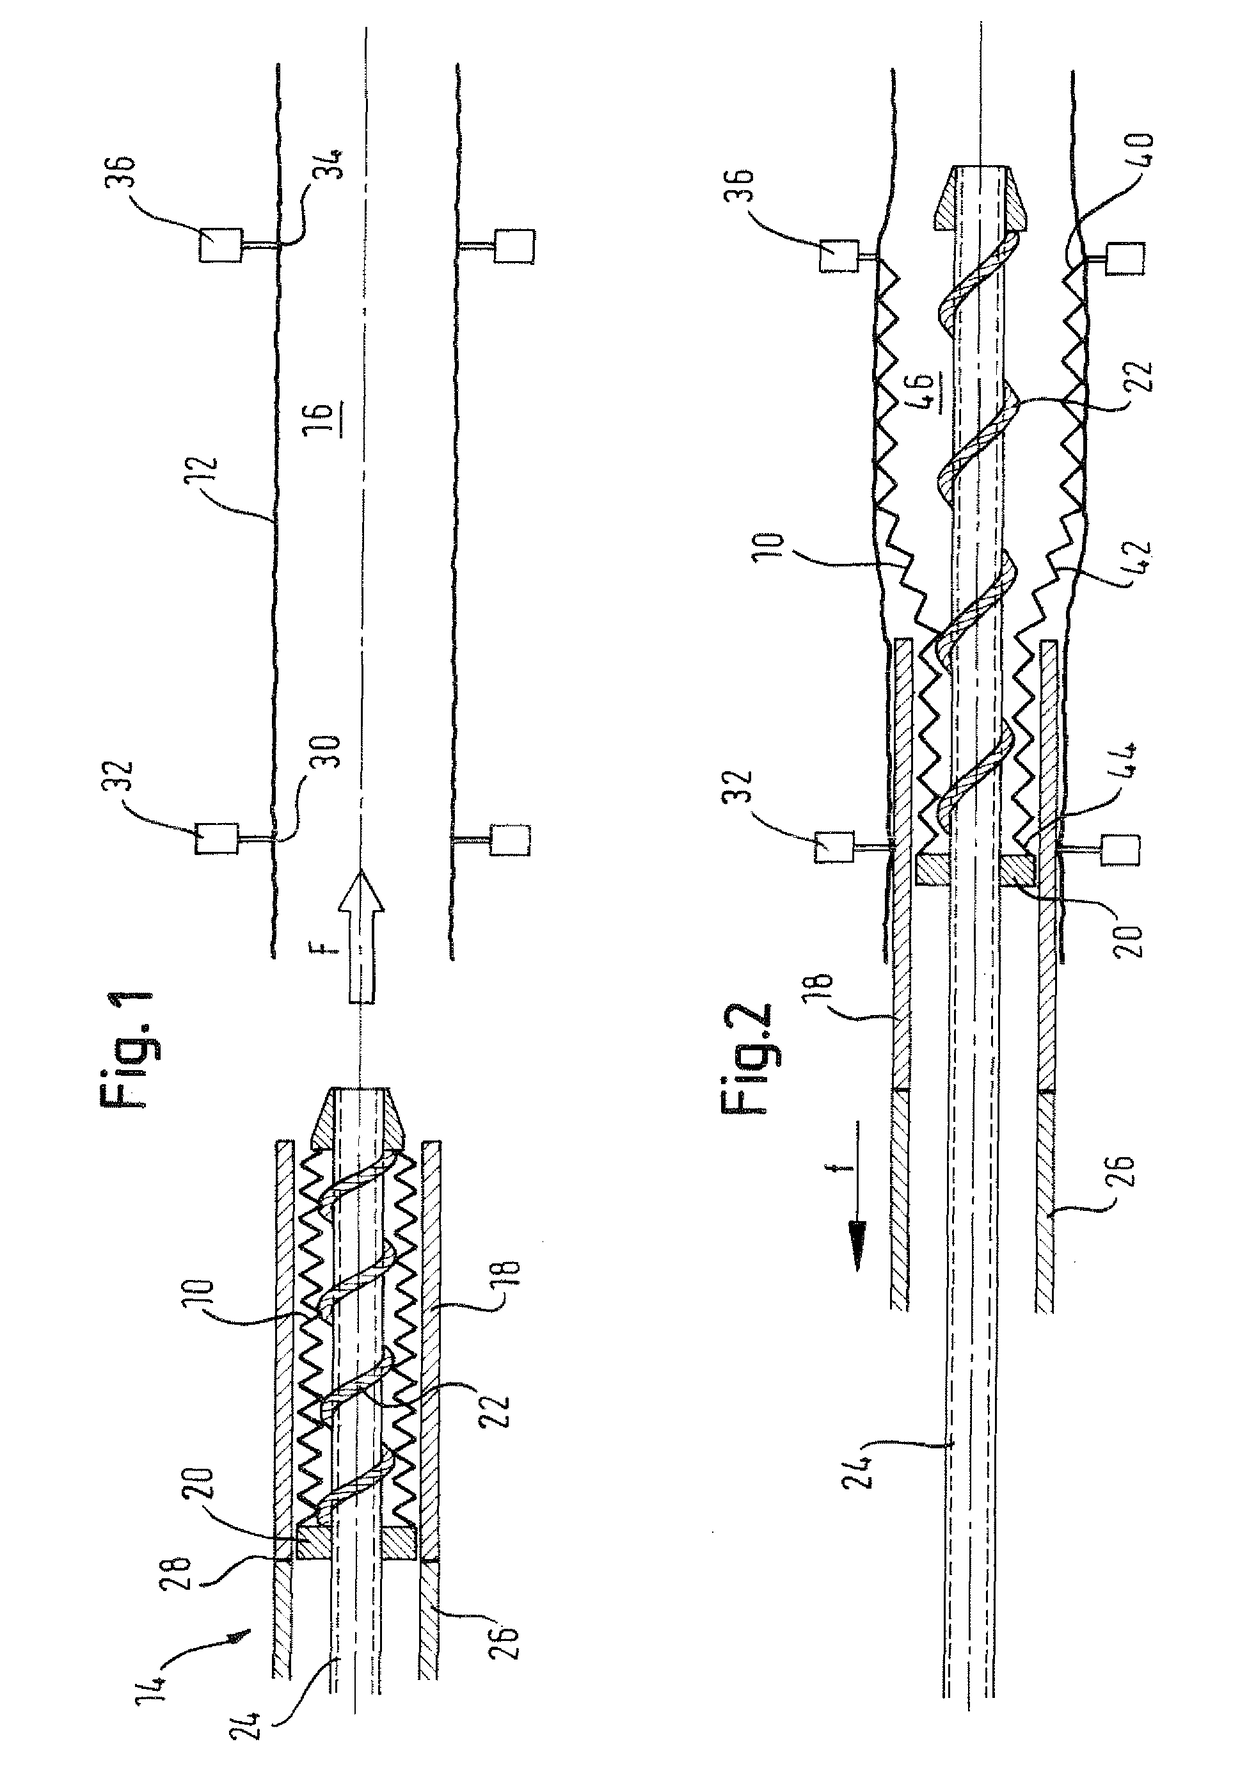 Method of loading a stent into a sheath